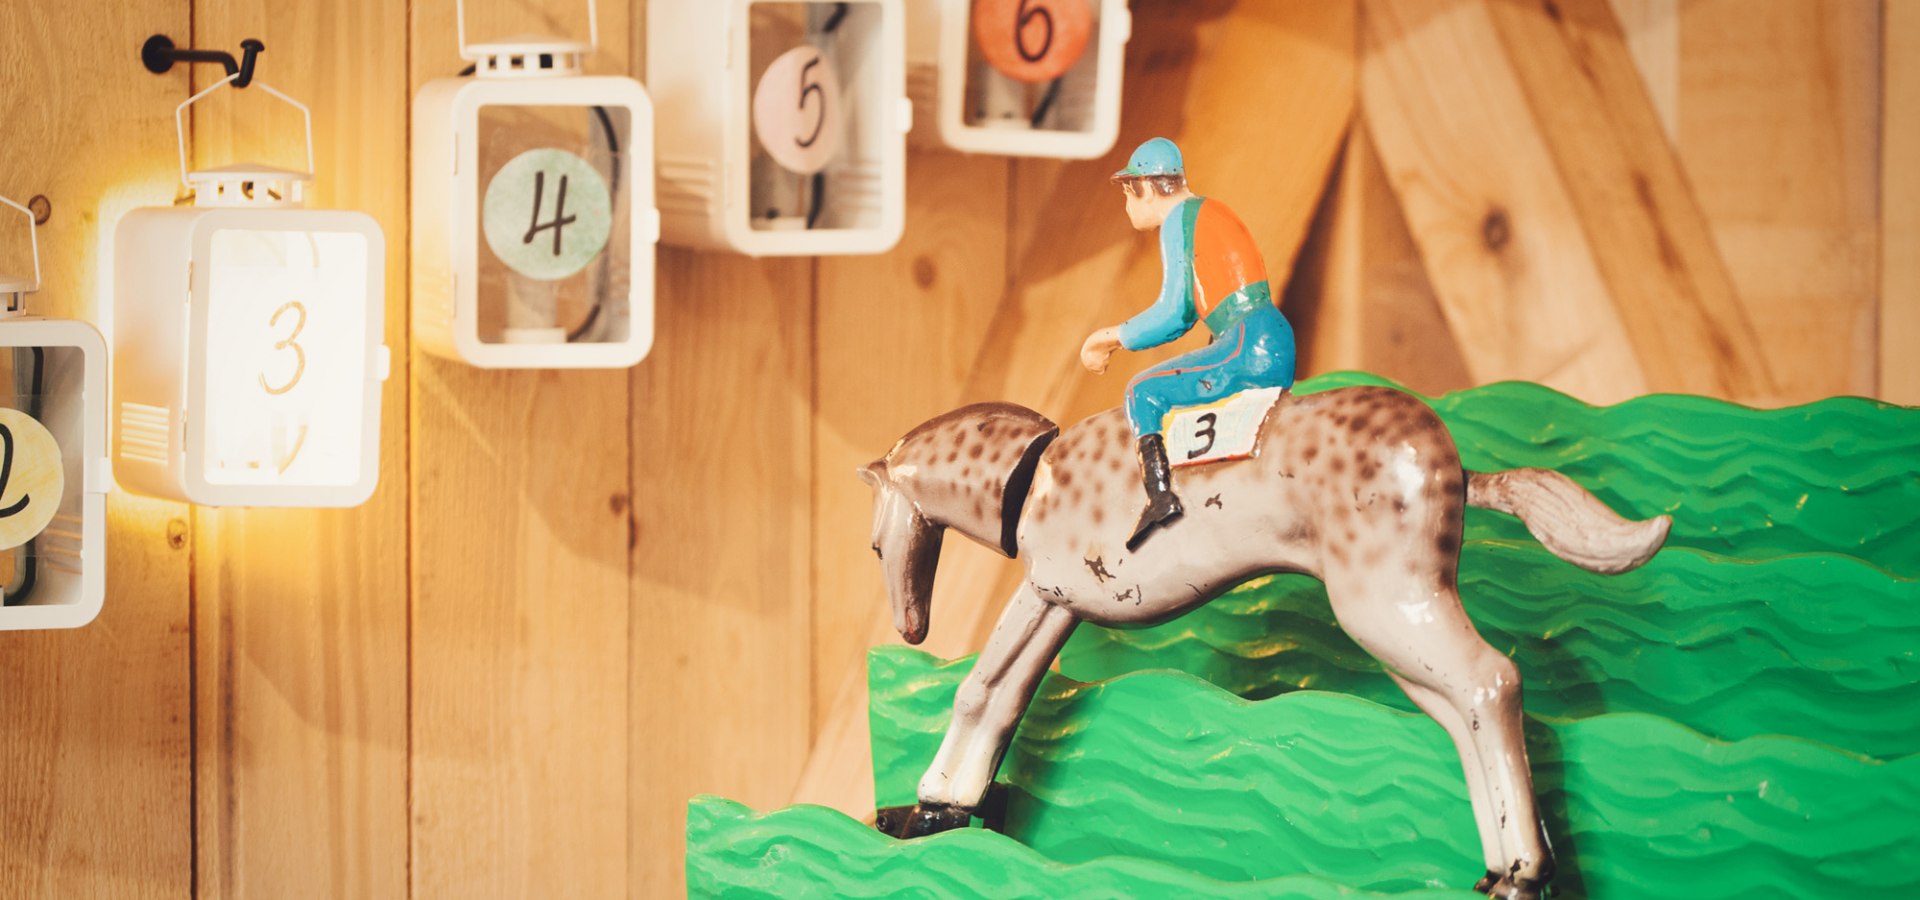 Get set on the exciting horse race with our rocking horses